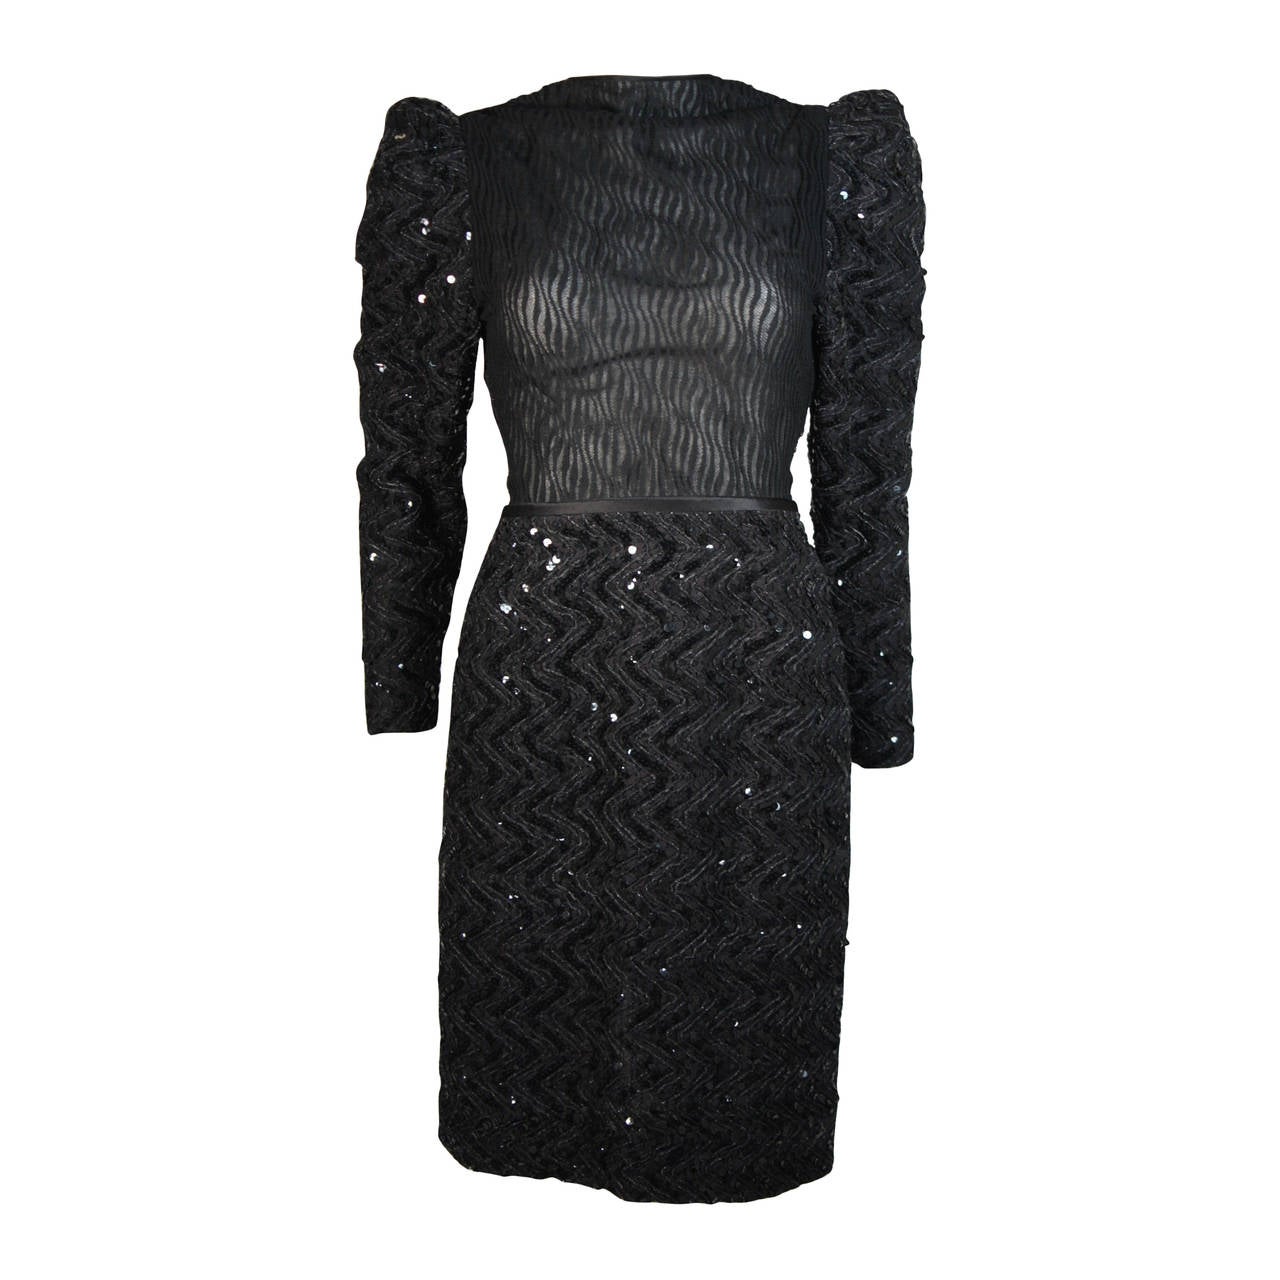 Vicky Tiel Attributed Black Sequin Cocktail Dress Size Small For Sale